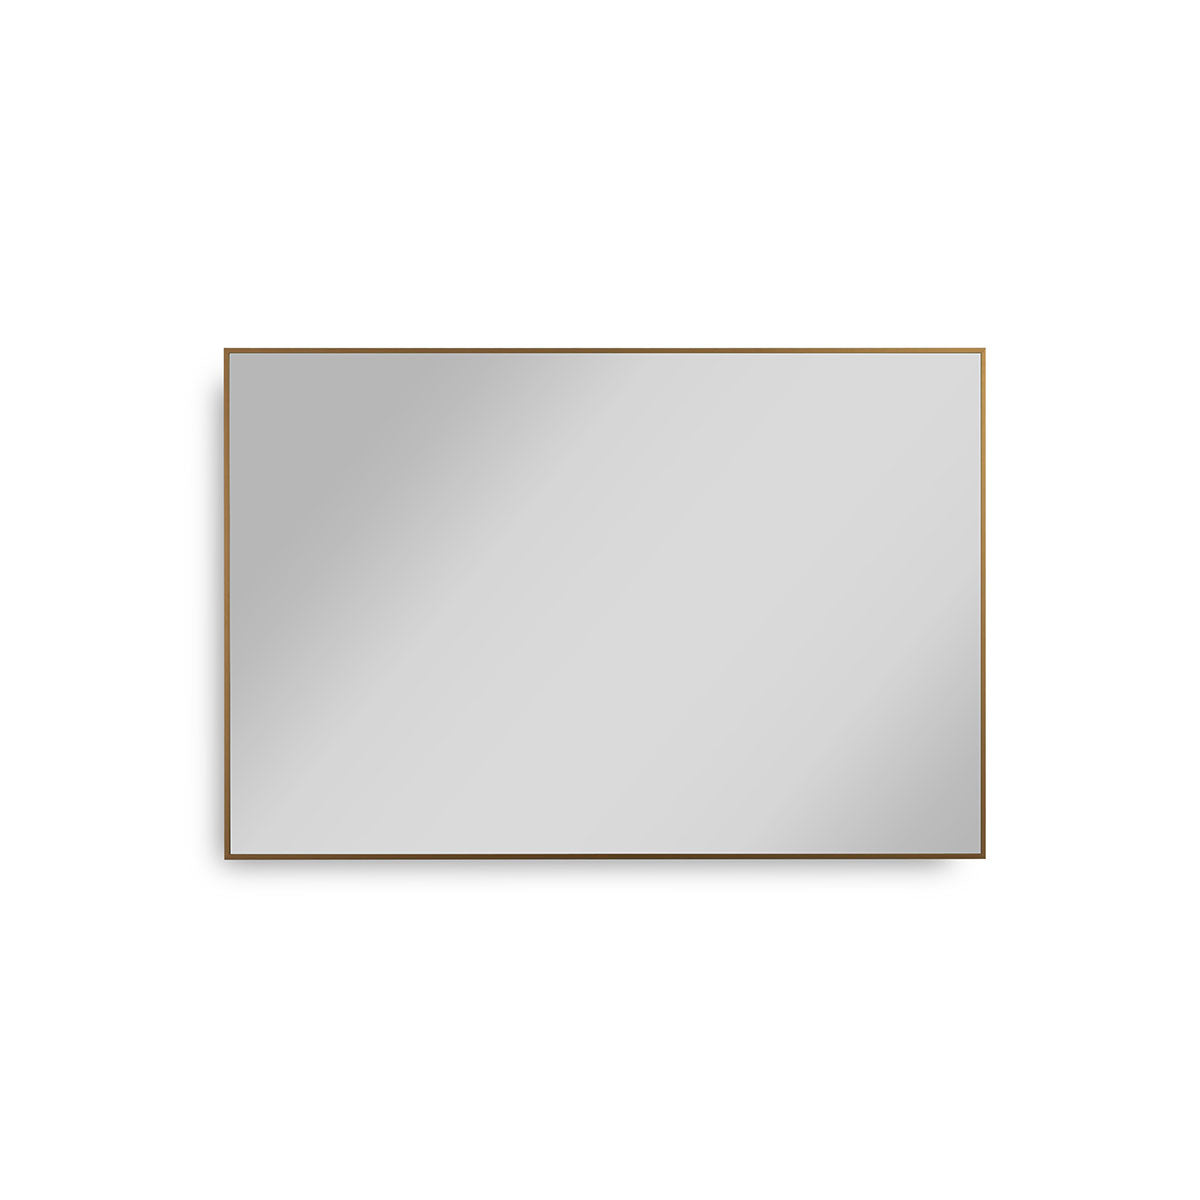 48"w x 32"h Aluminum Rectangle Bathroom Wall Mirror (Brushed Gold) - iStyle Bath